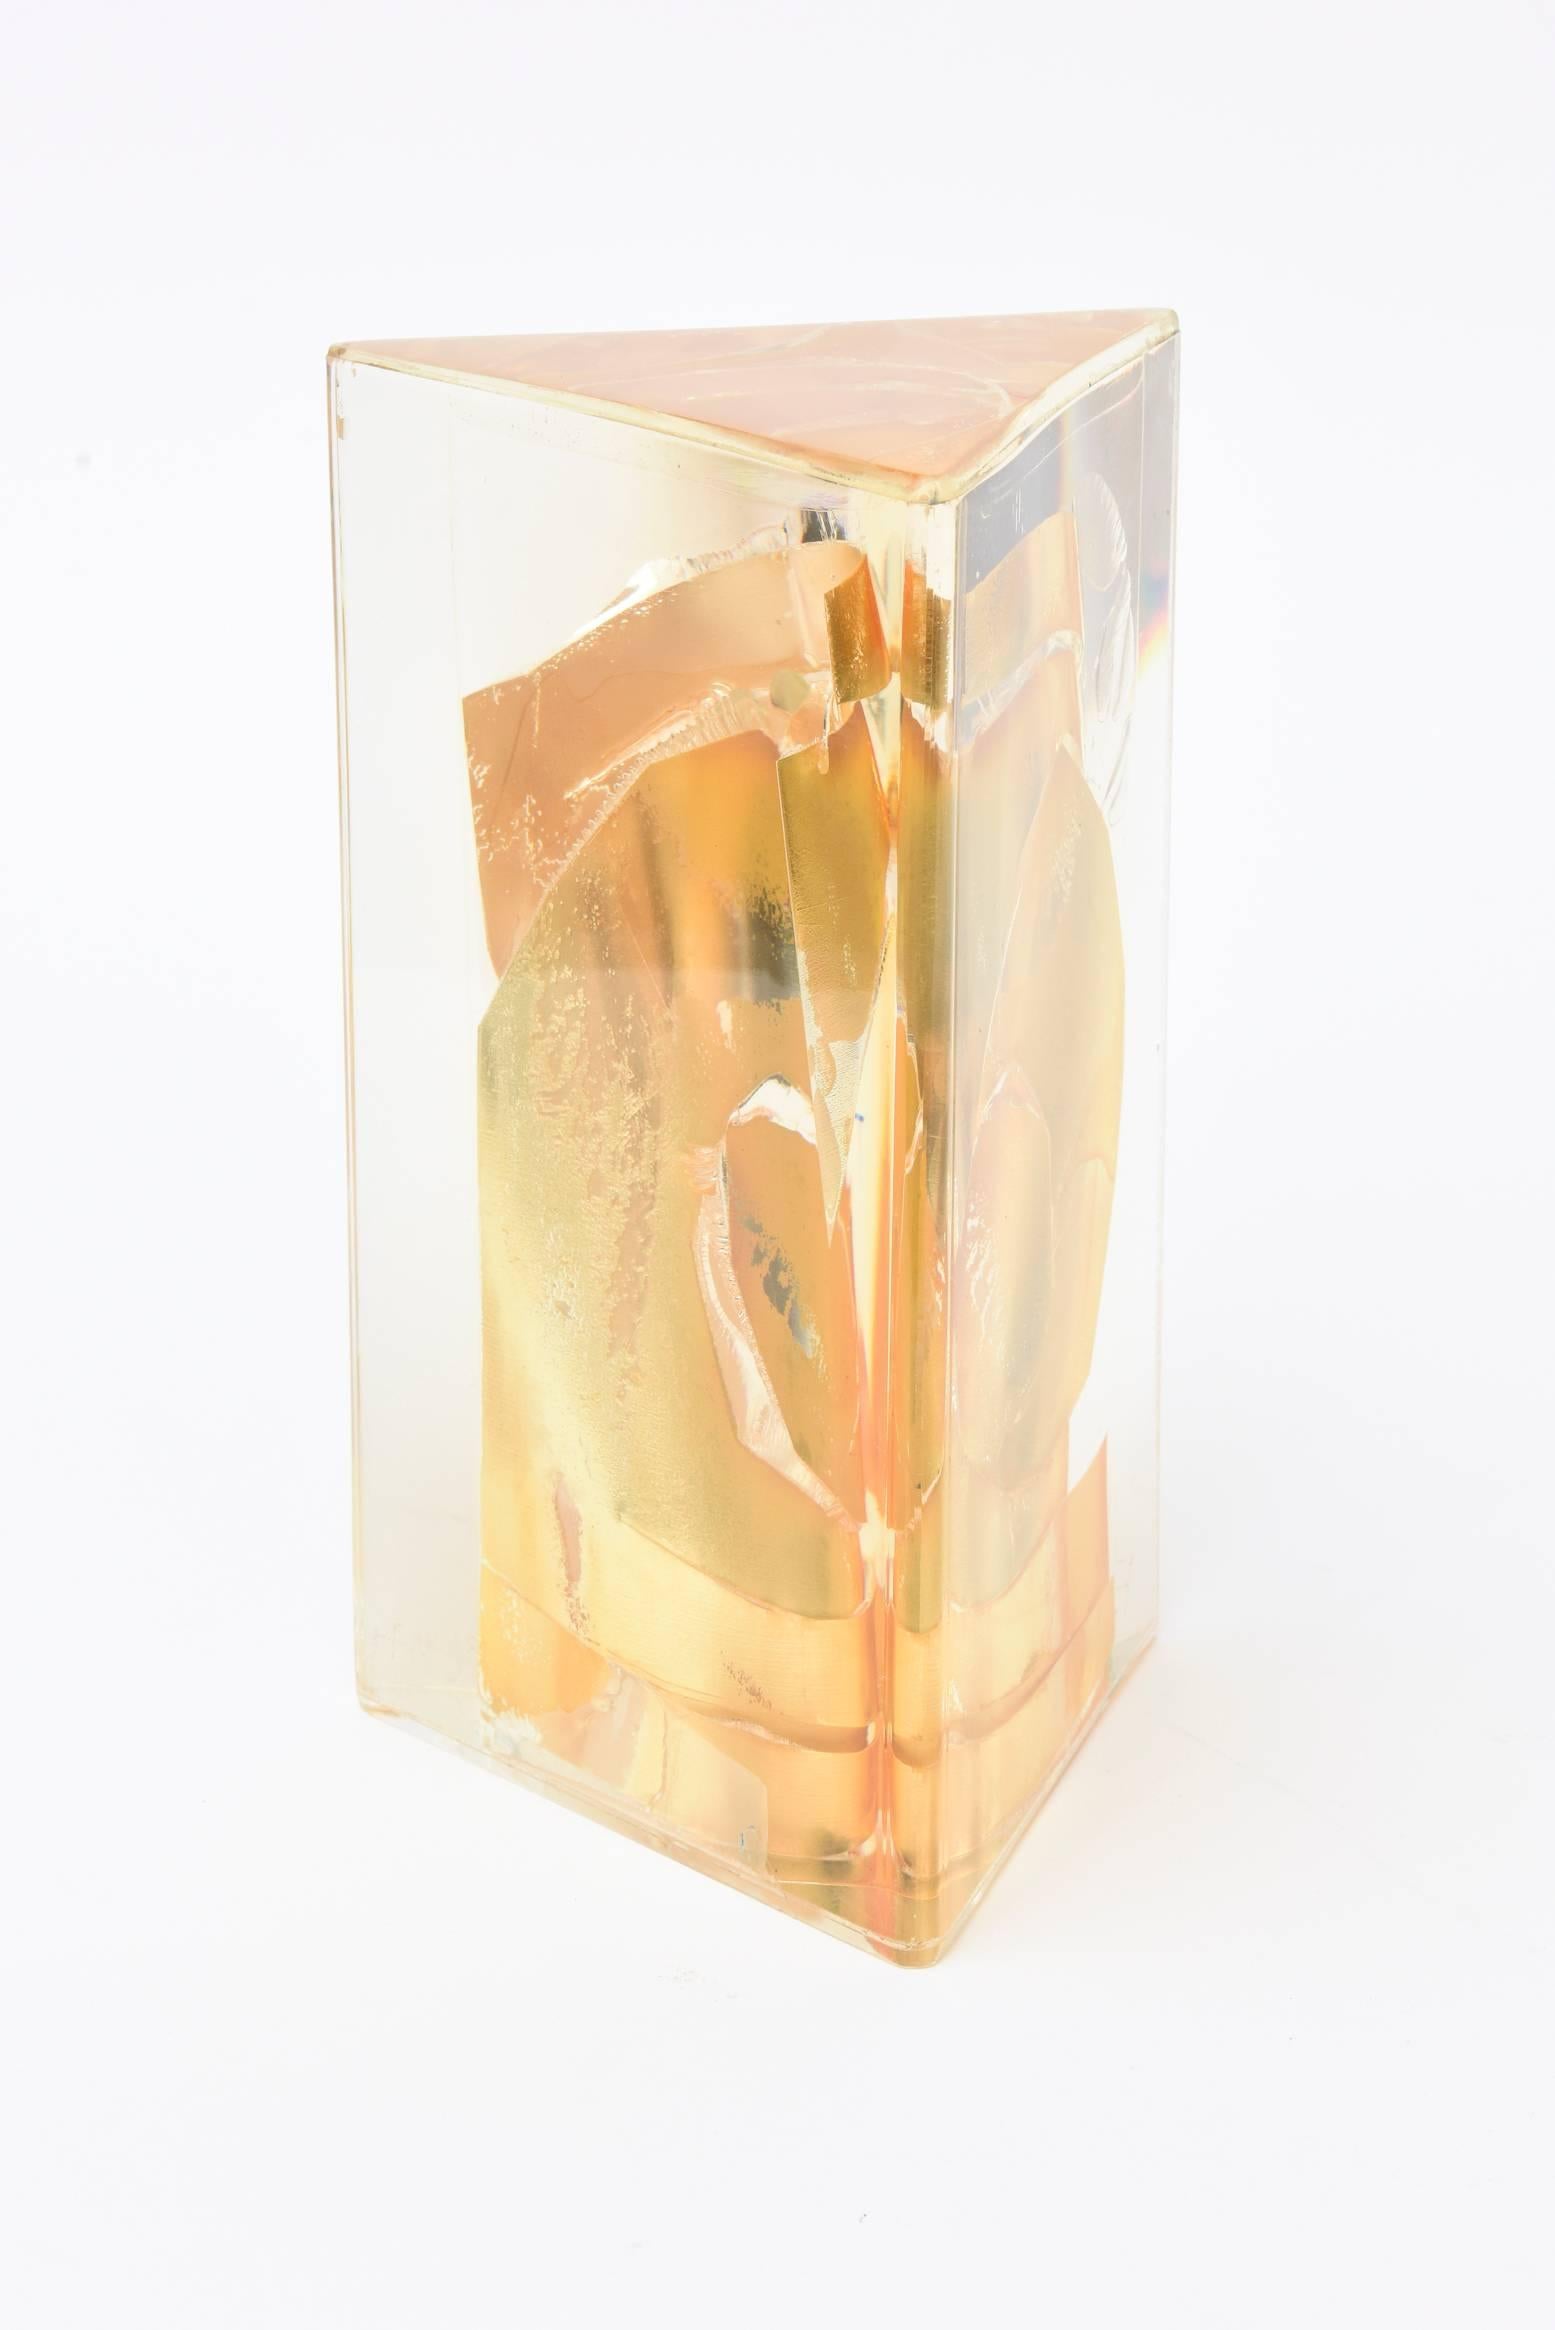 This fabulous Lucite vintage embedded sculpture is signed Béjar 1971 on the bottom. It has fragments of fractal solid gold leaf embedded and encased in the Lucite triangular form. It is much more rich and beautiful in person. The outside of the